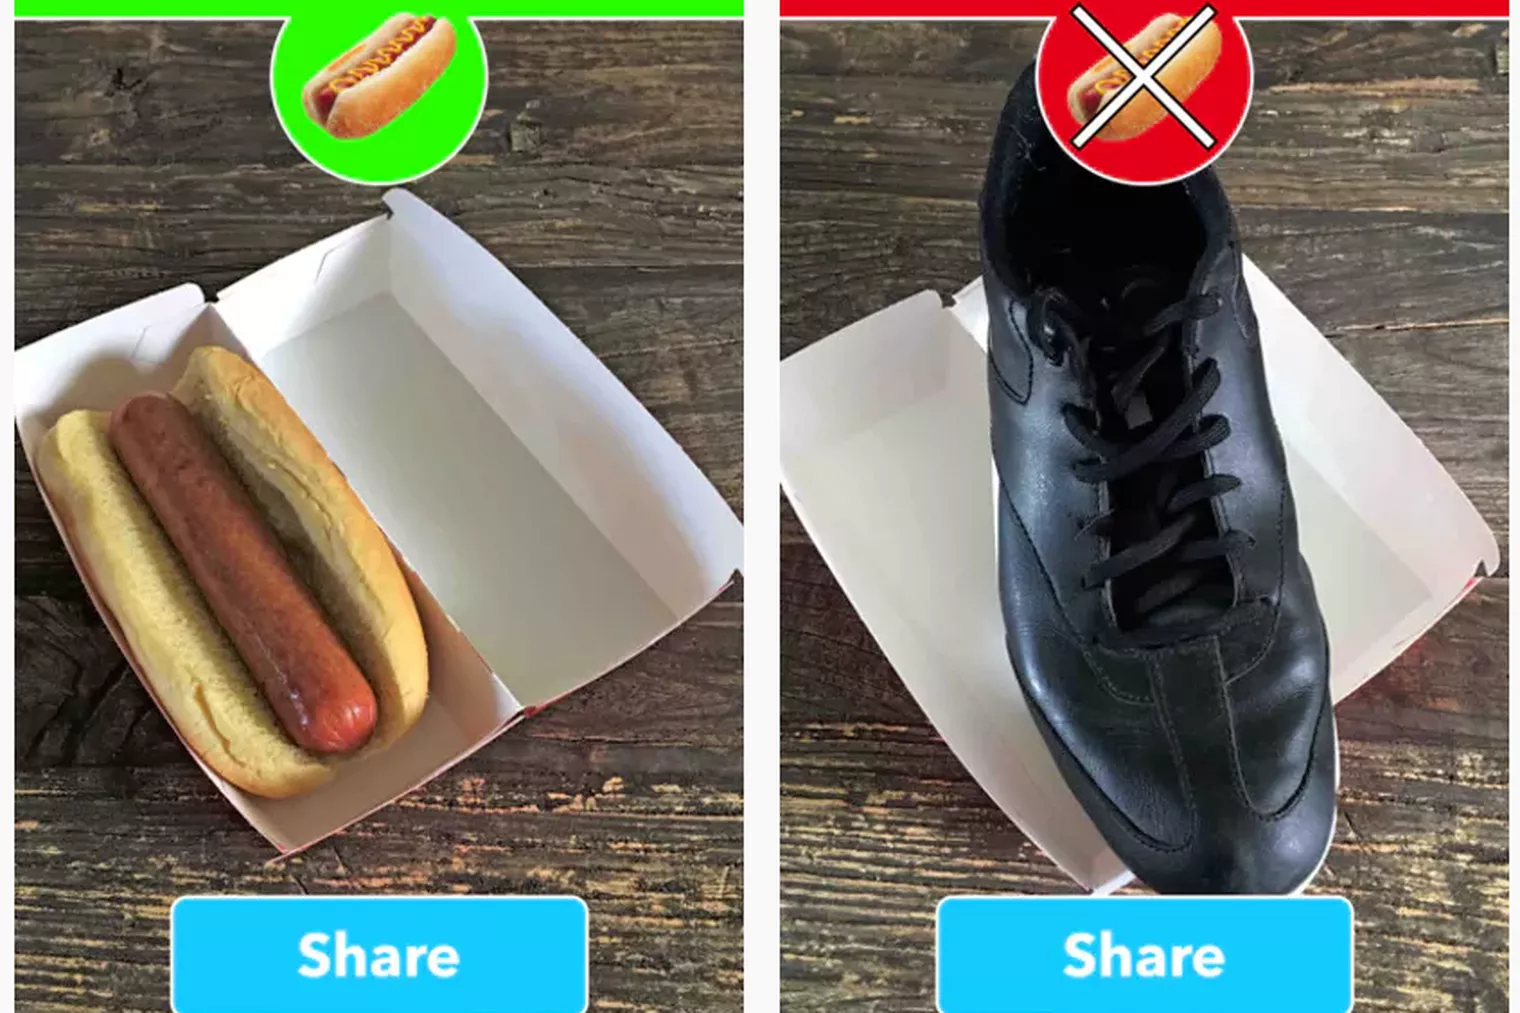 Image from the hot dog / not a hot dog classifier, comparing a hot dog to a shoe